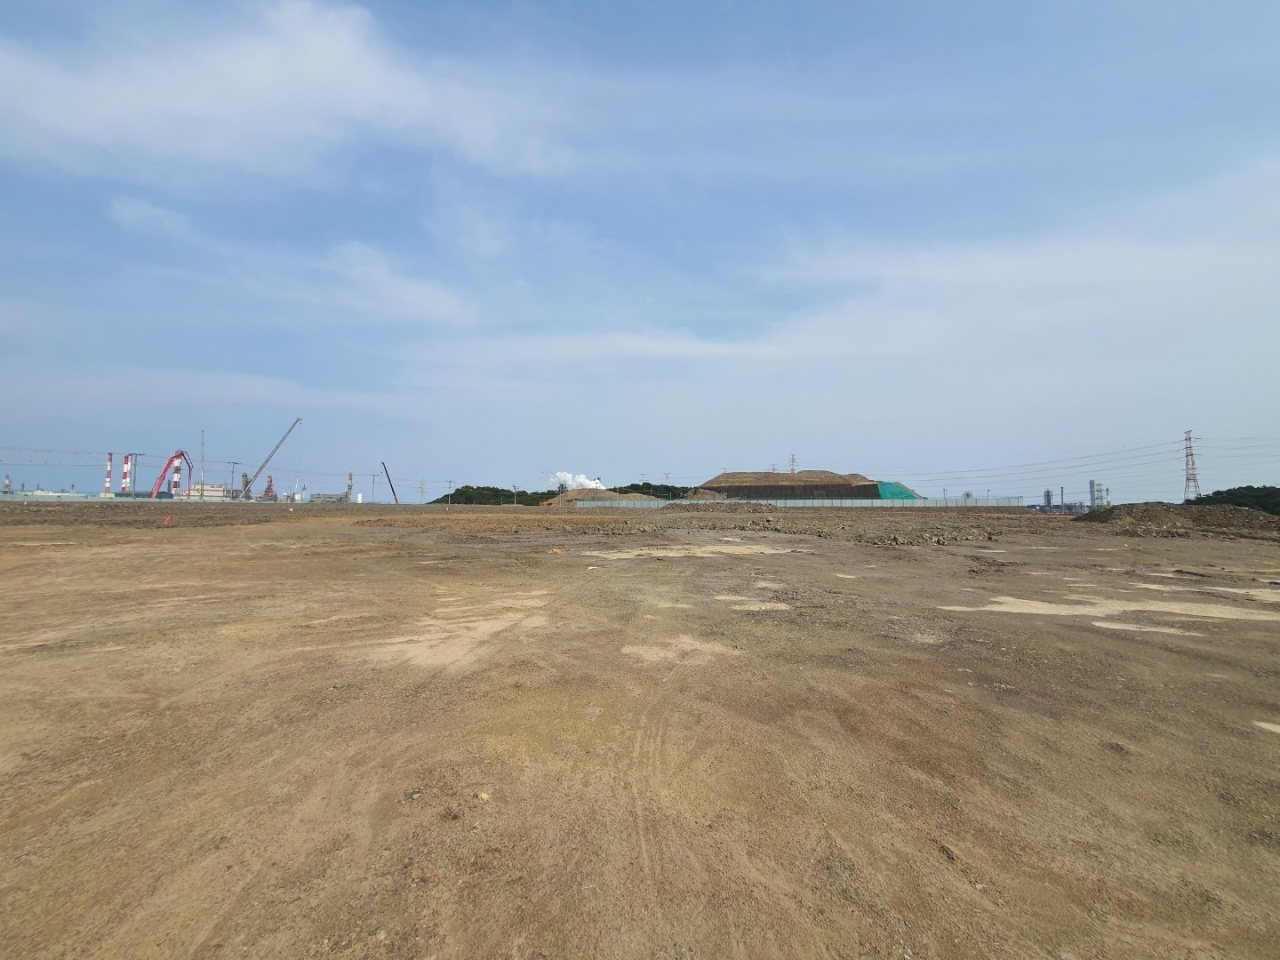 A view of a greenfield in Ulsan, where SK Innovation's chemical plastic recycling complex will be located. (SK Innovation)